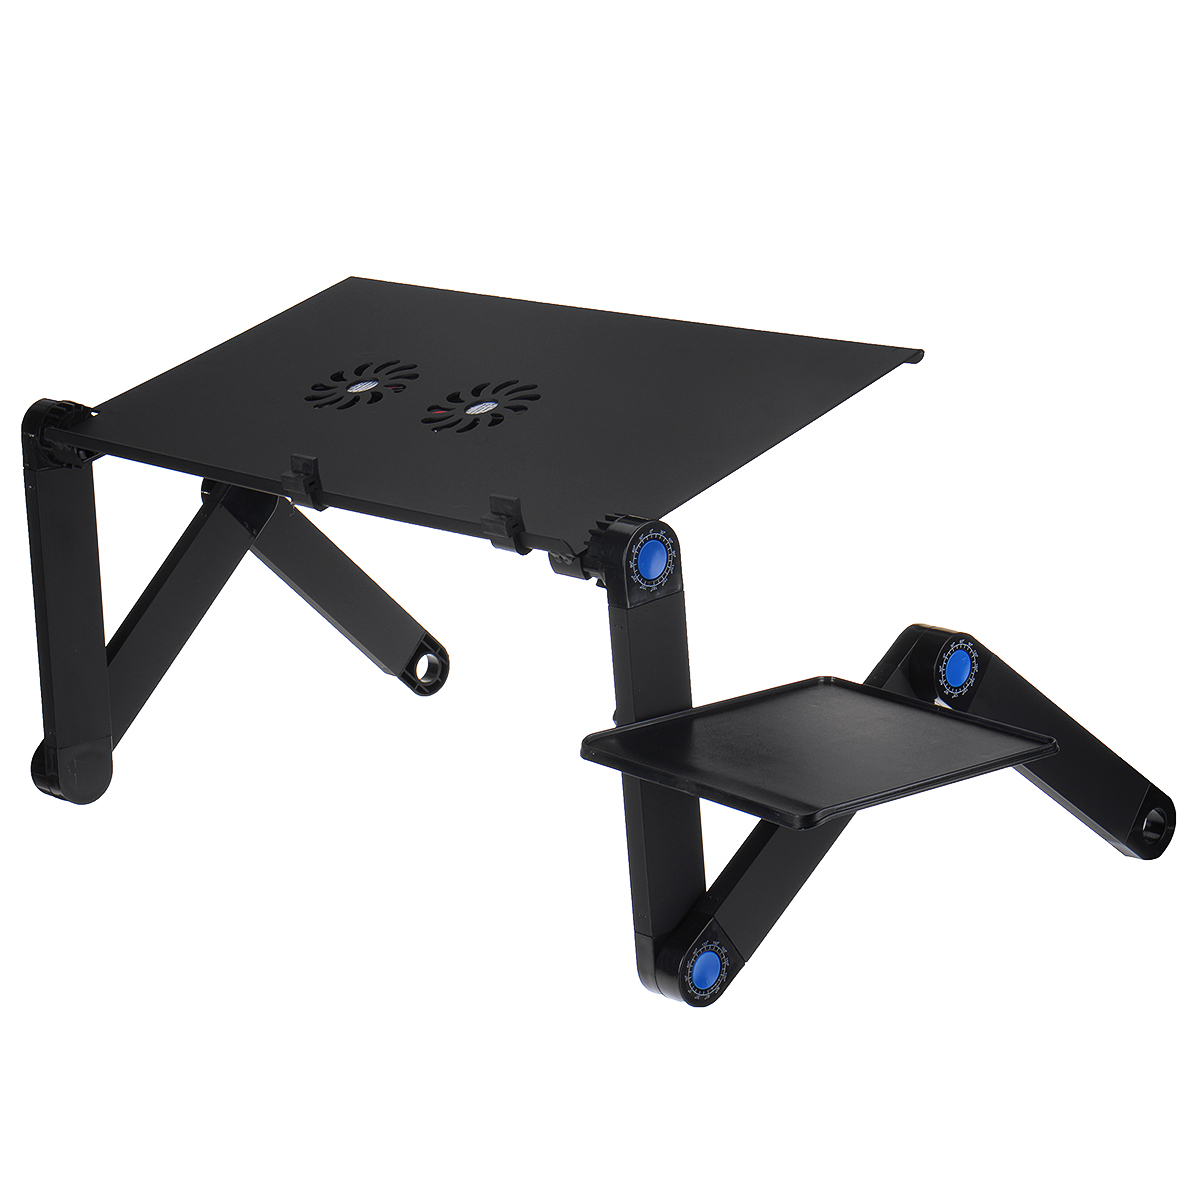 Cooling-Laptop-Desk-360-Degree-Aluminum-Alloy-Adjustable-Foldable-Cooling-Notebook-Table-for-Sofa-Be-1786133-12